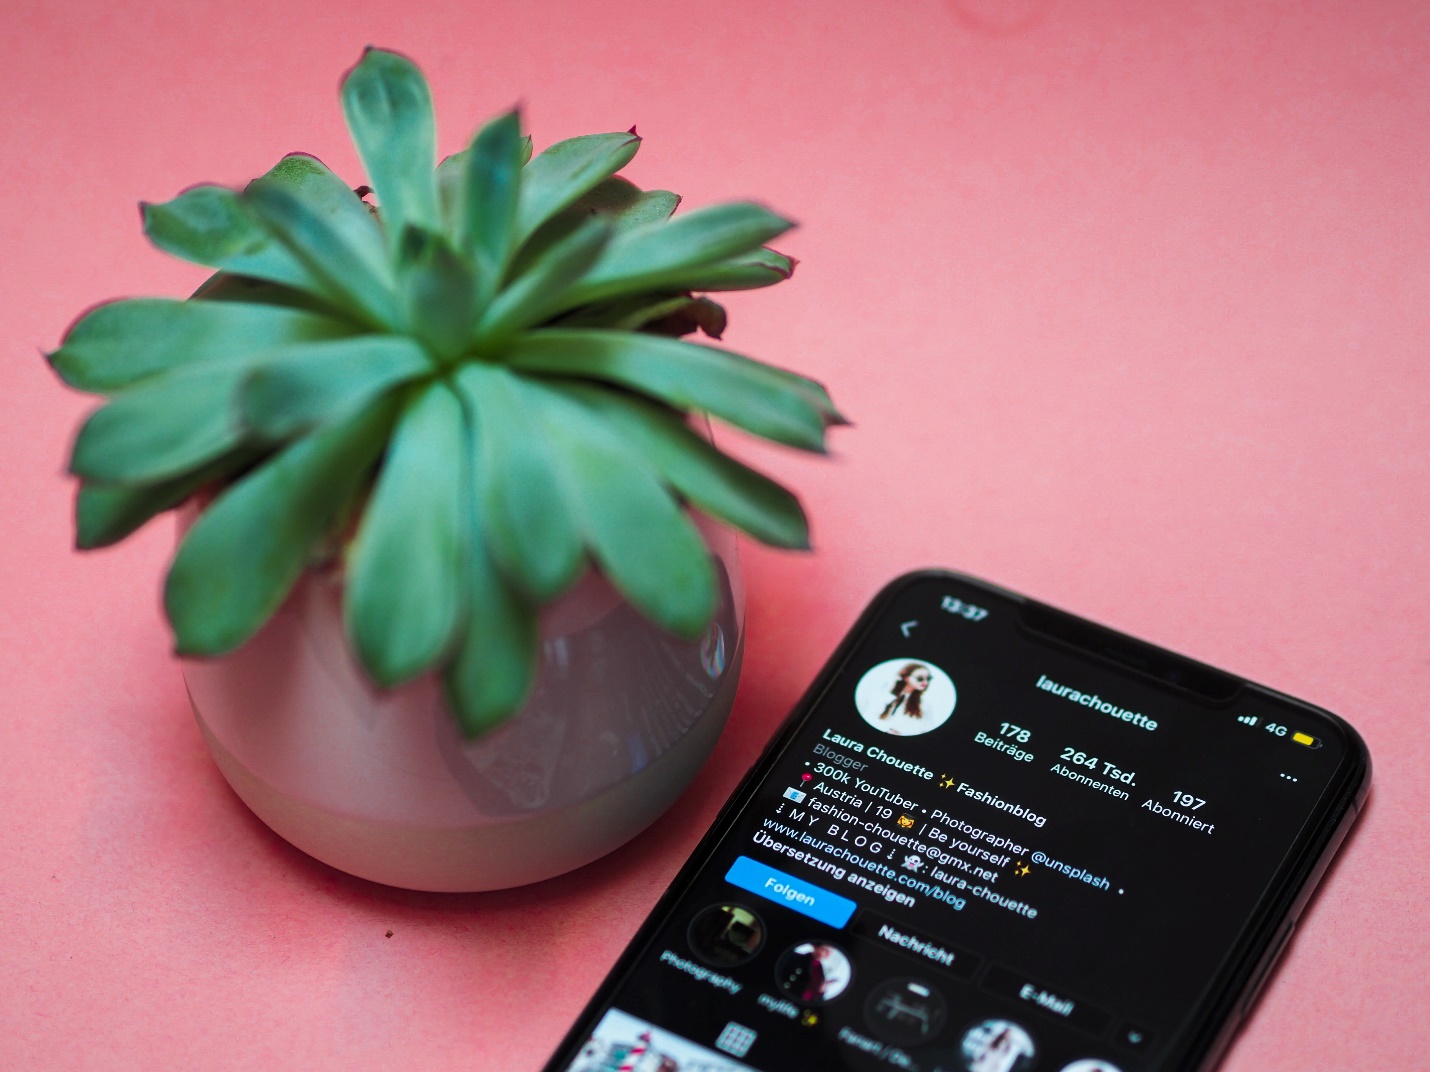 an image of a plant next to a mobile displaying the Instagram page of an influencer to signify influencer marketing